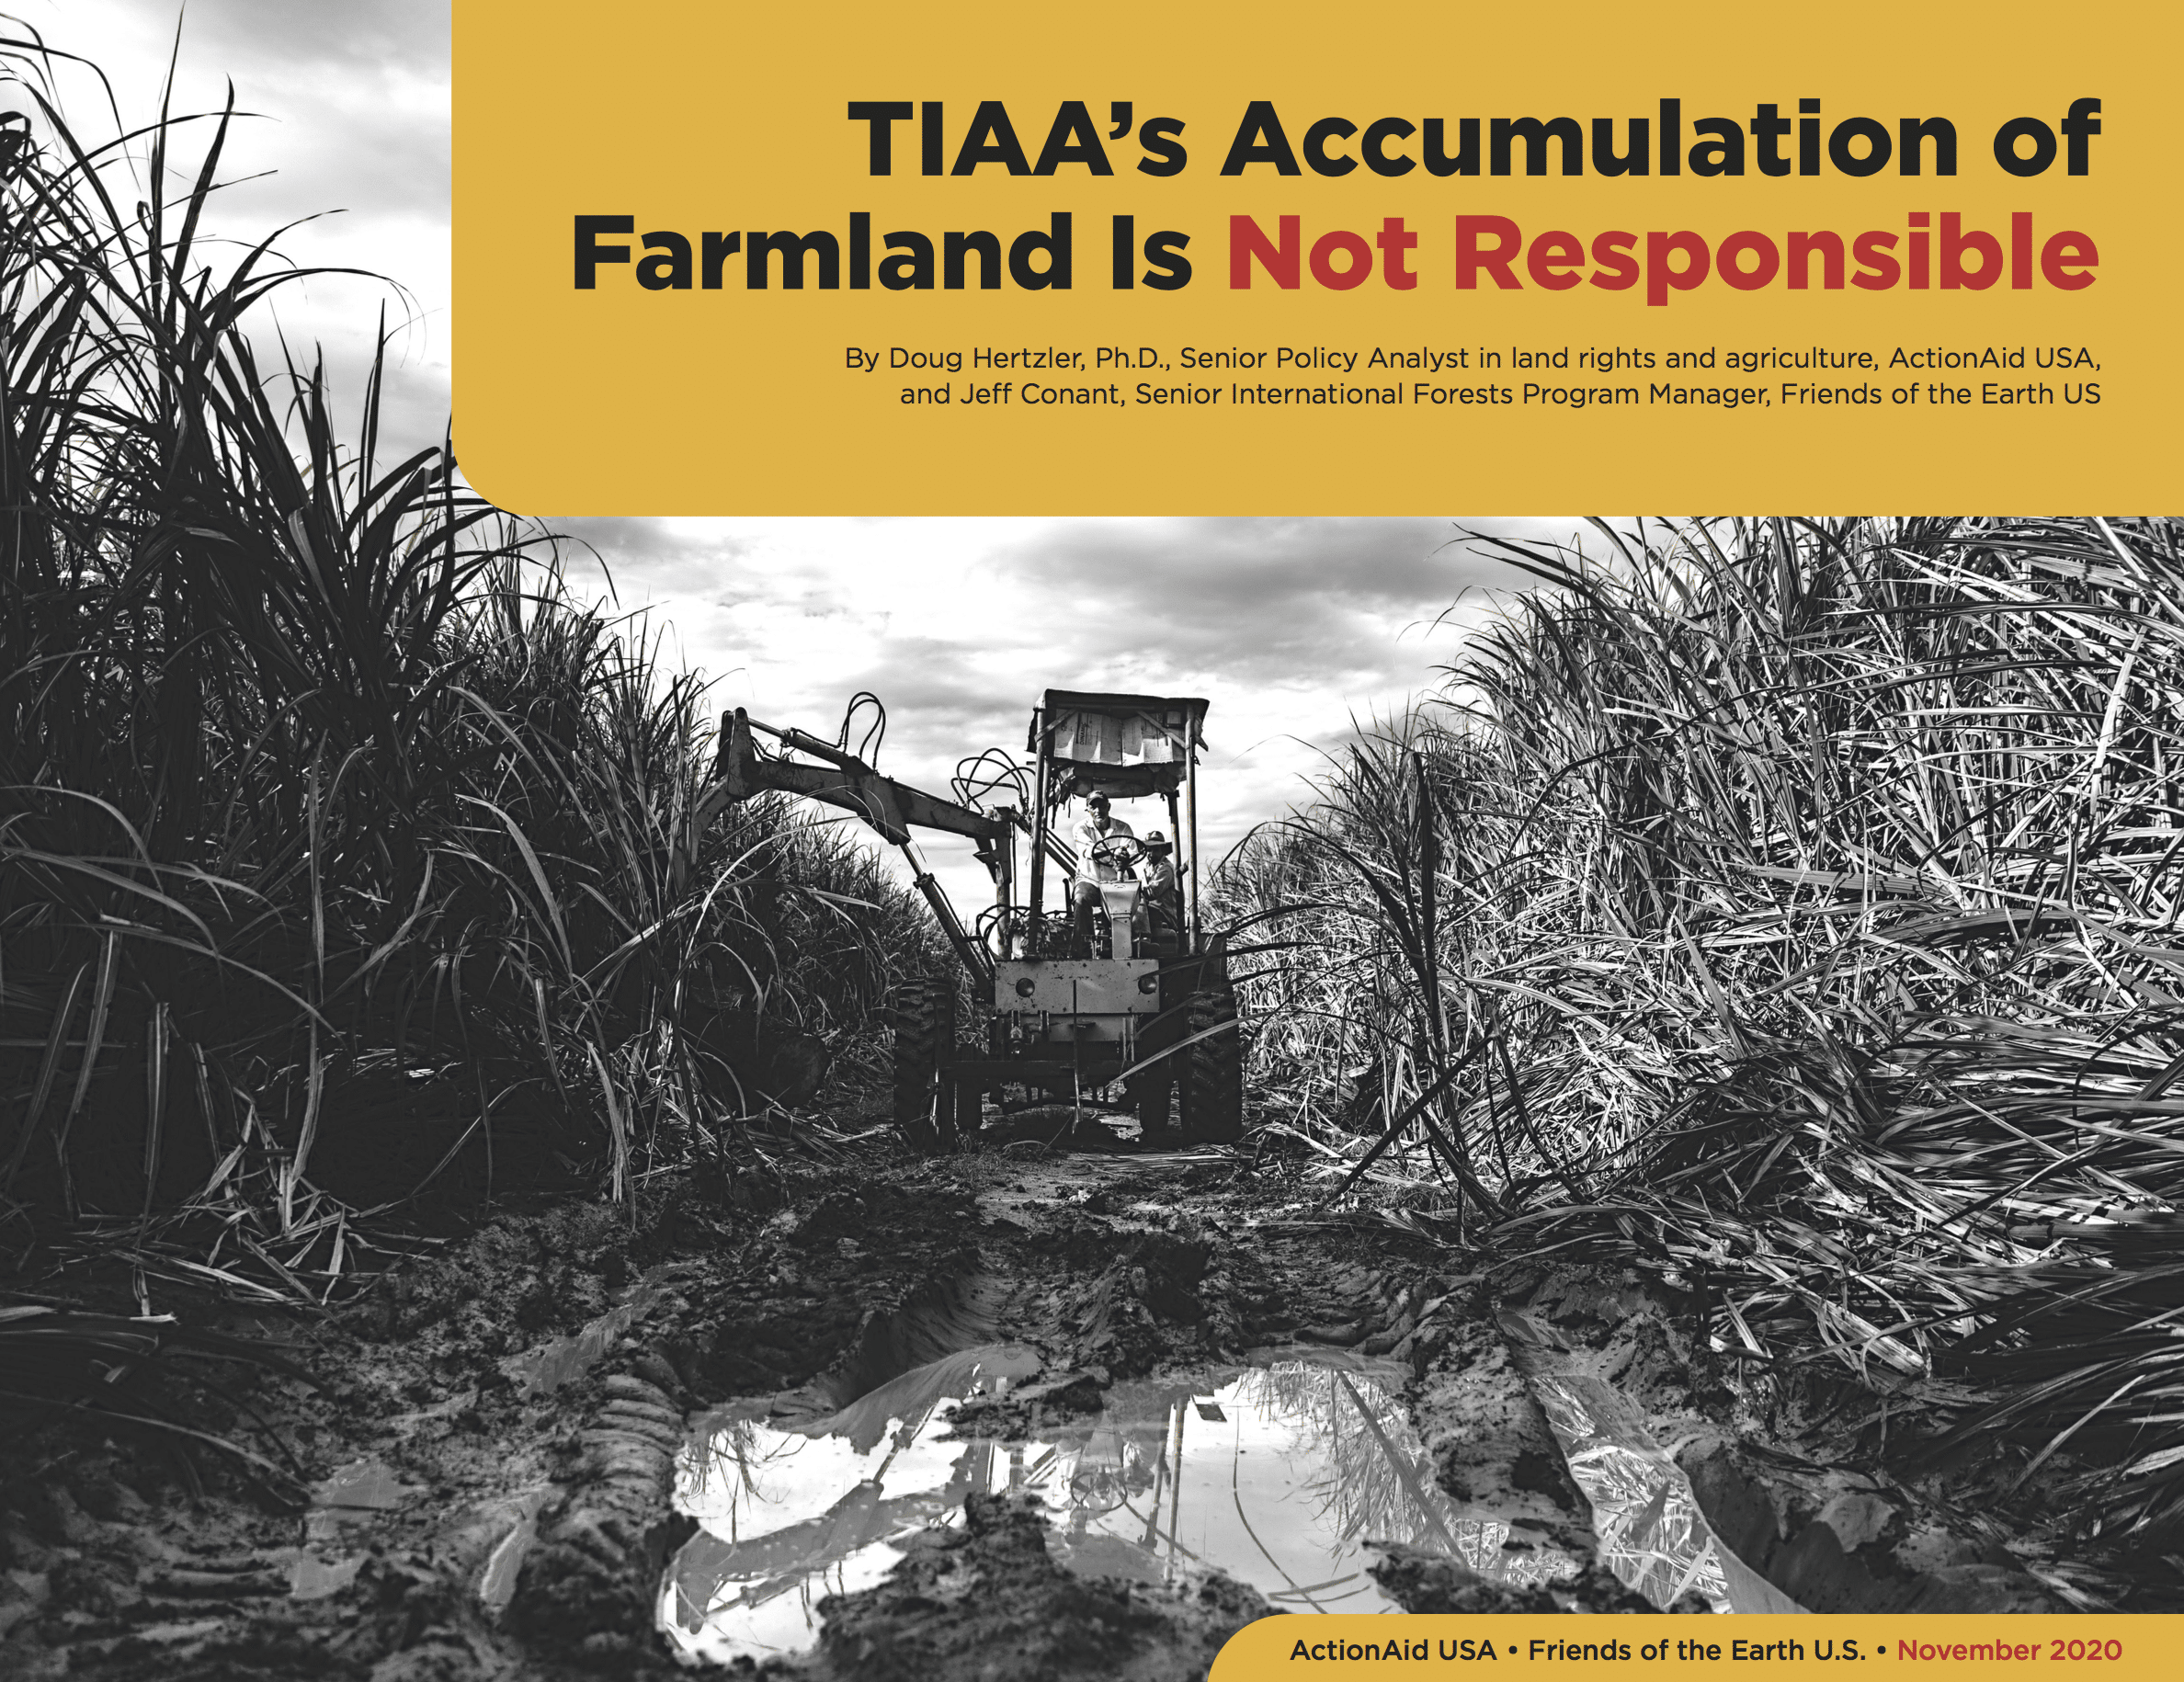 TIAA’s Accumulation of Farmland is Not Responsible